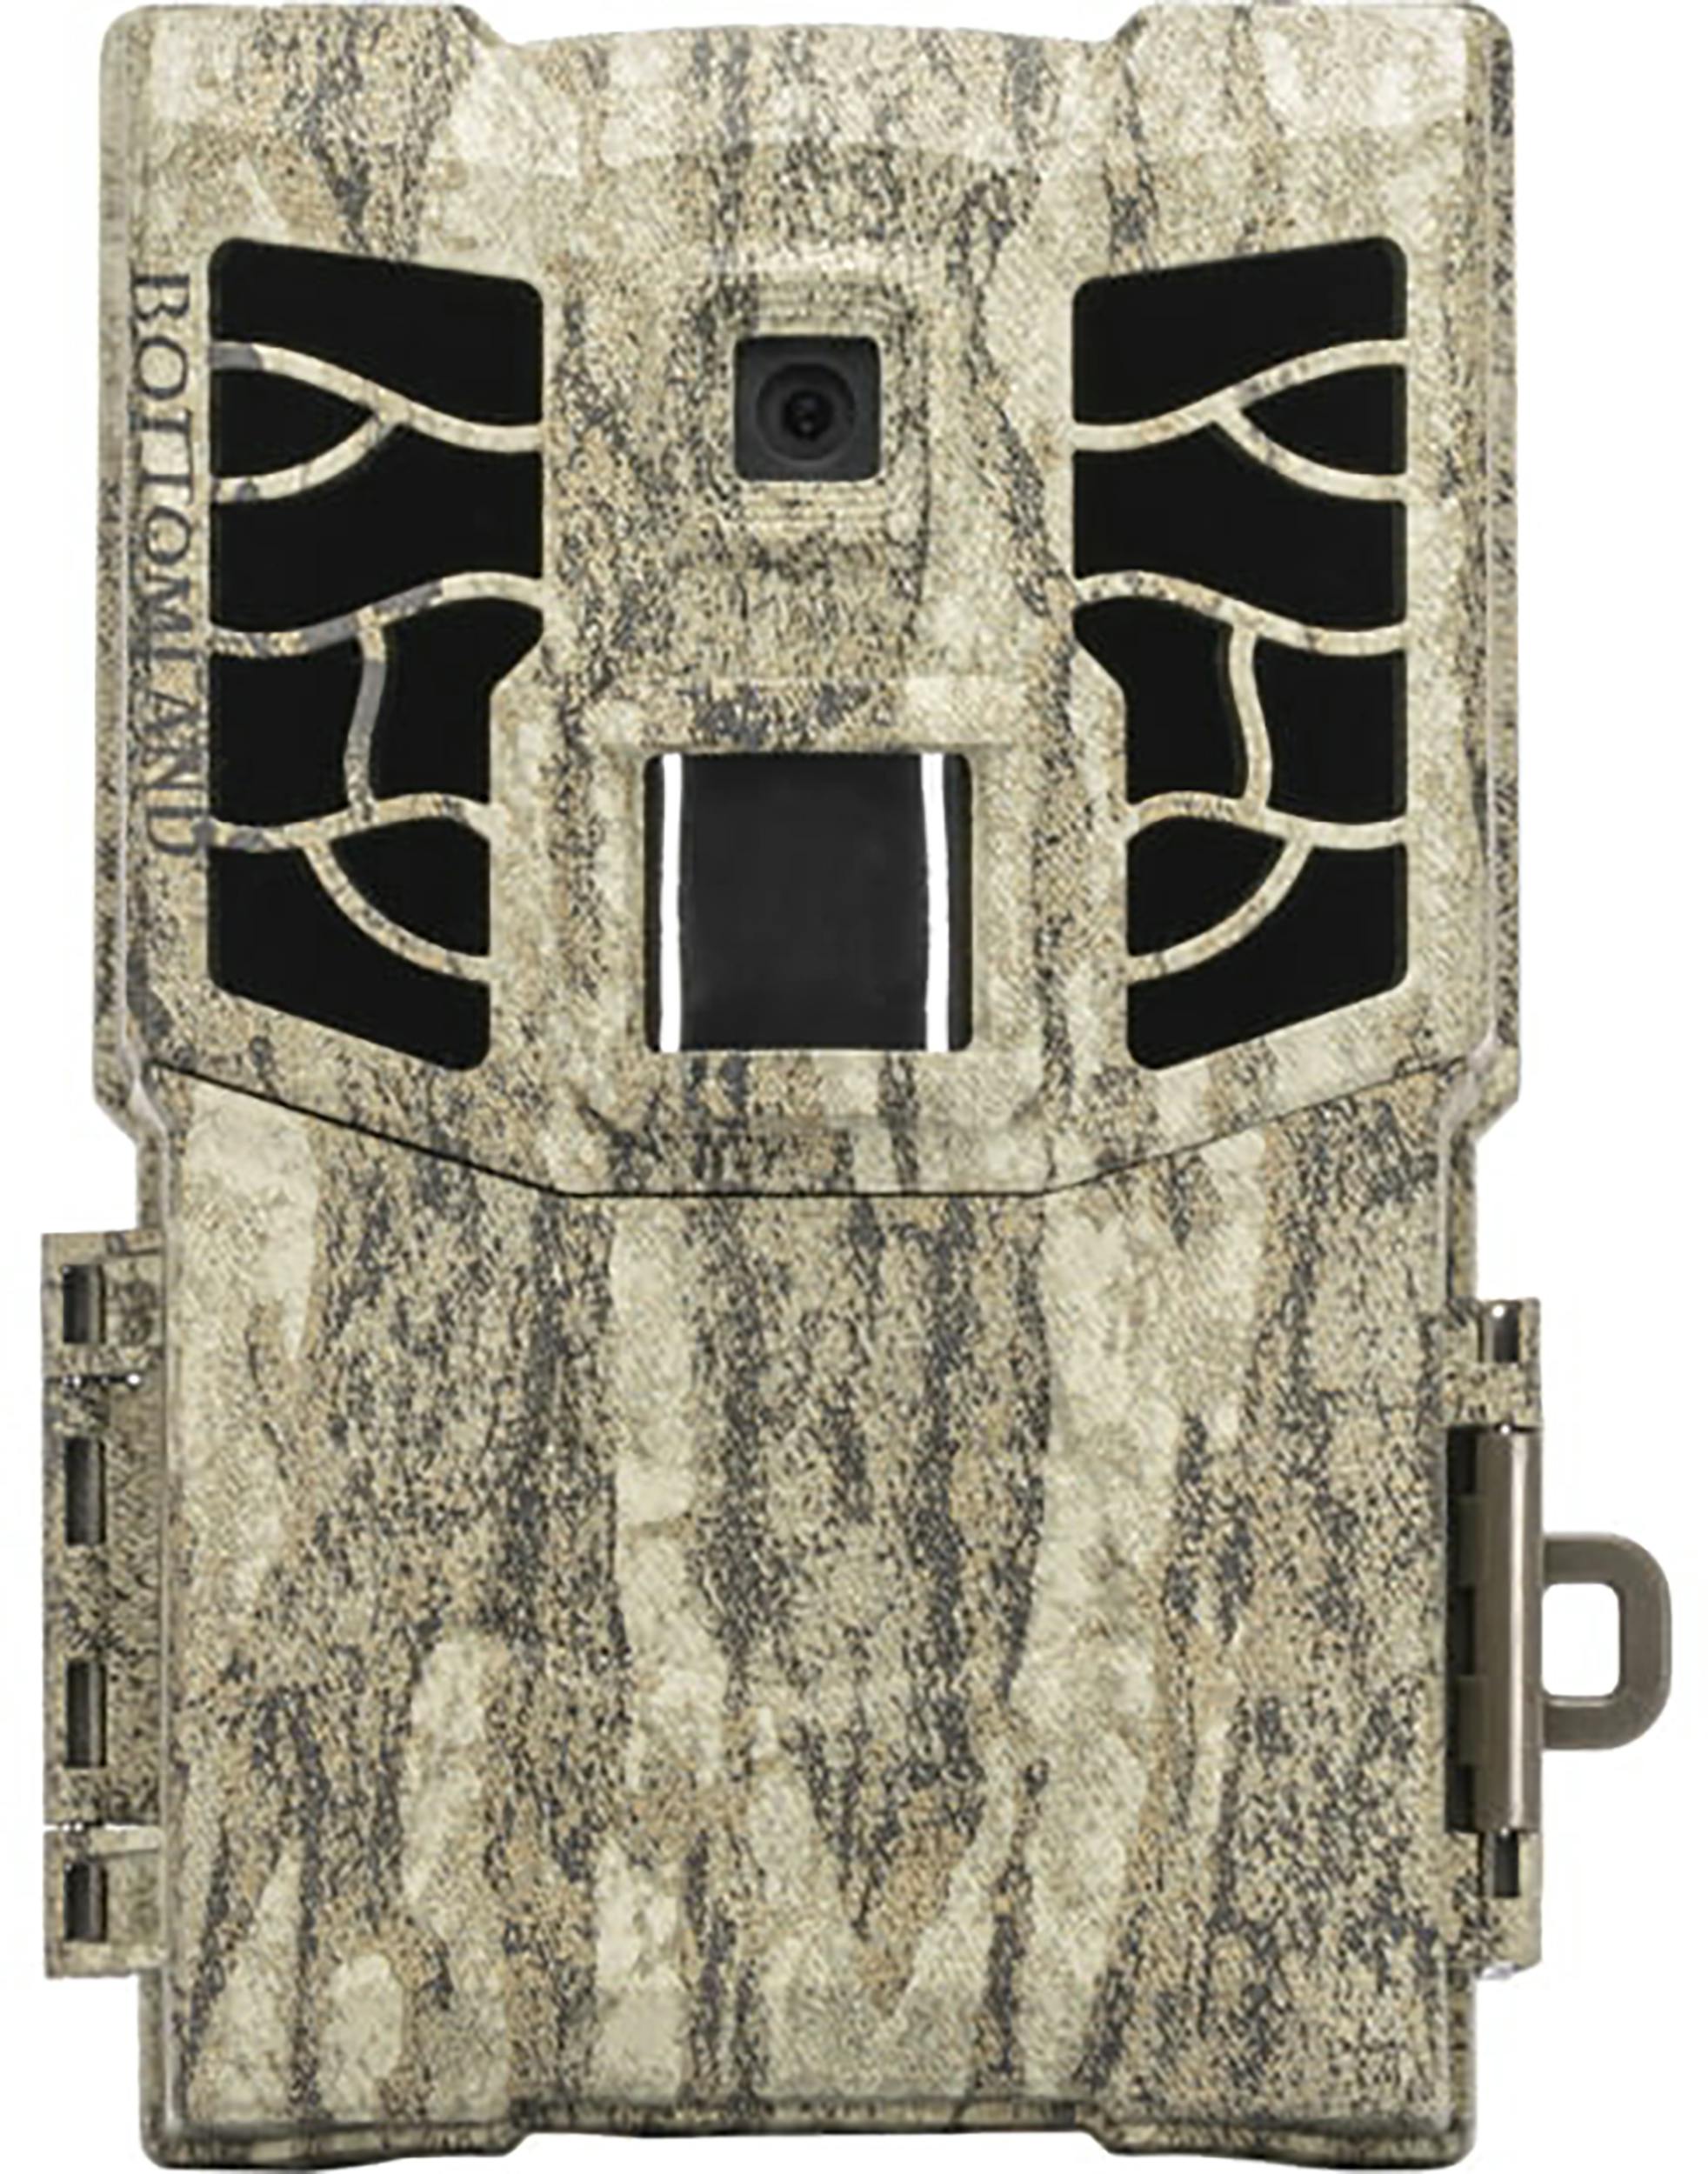 Covert Scouting Cameras MP32 Mossy Oak Bottomlands, 32 MP Resolution, 32GB-img-0